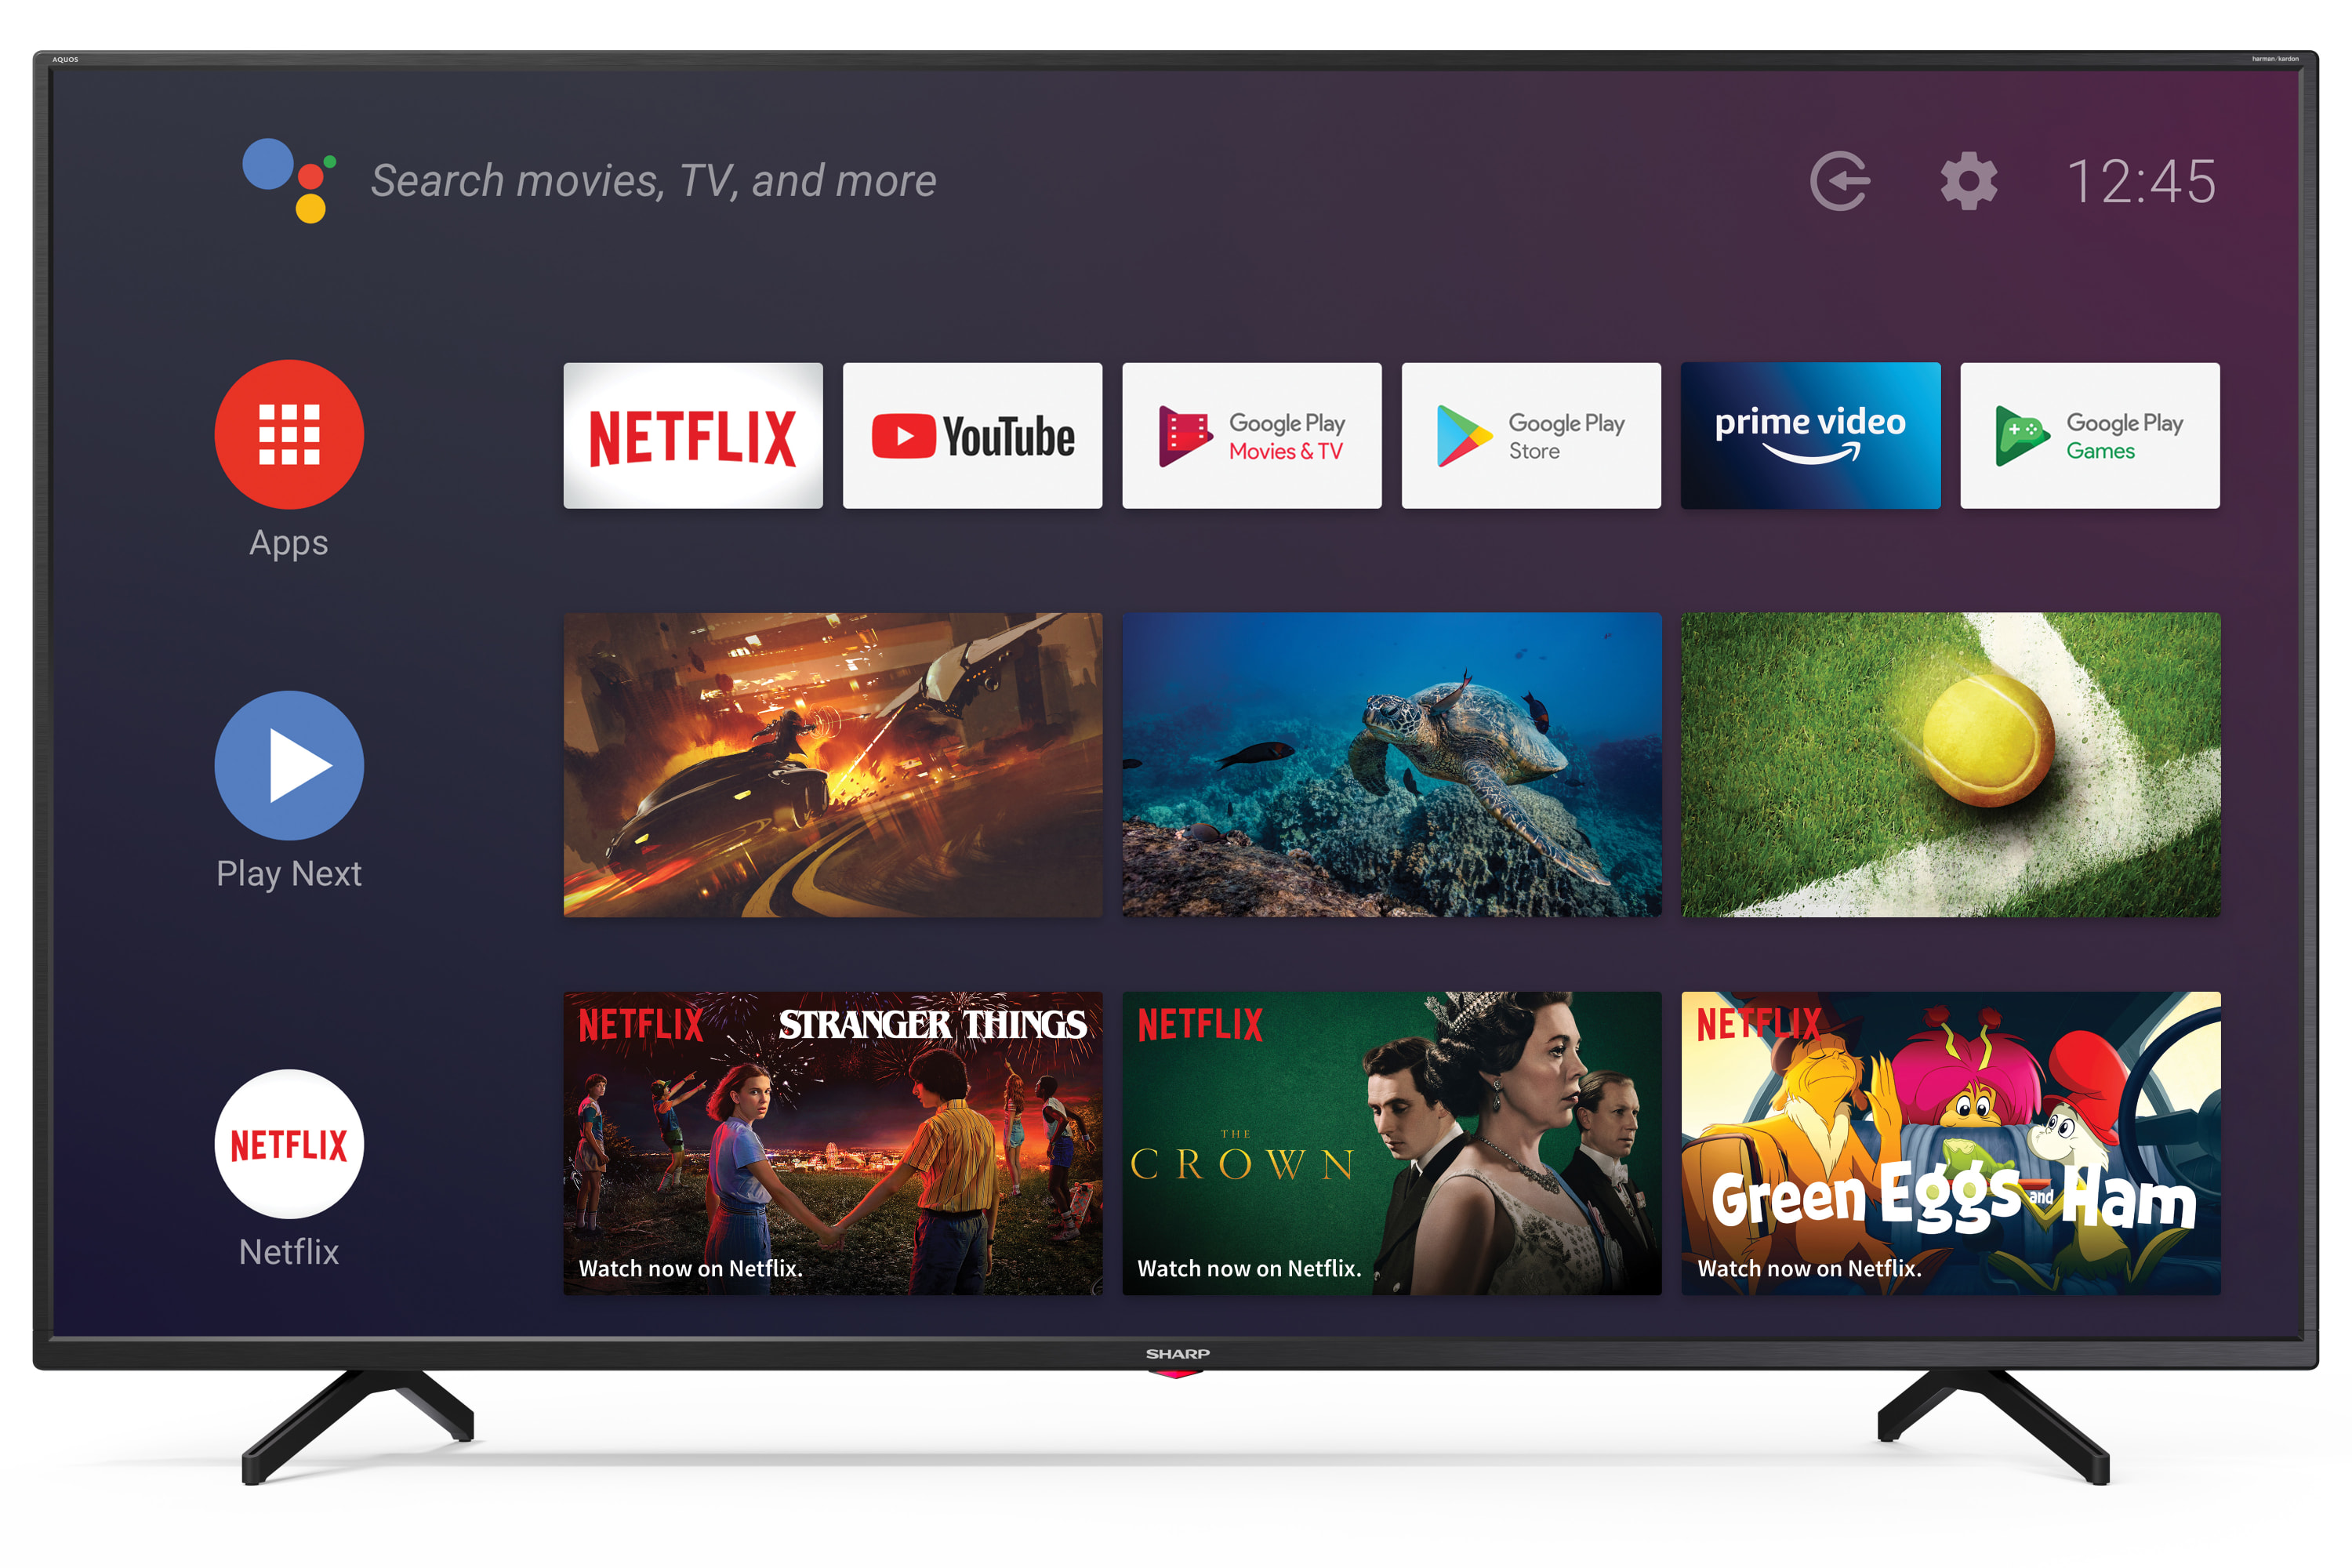 Android TV 4K UHD - 65" ANDROID TV™ ULTRA HD 4K